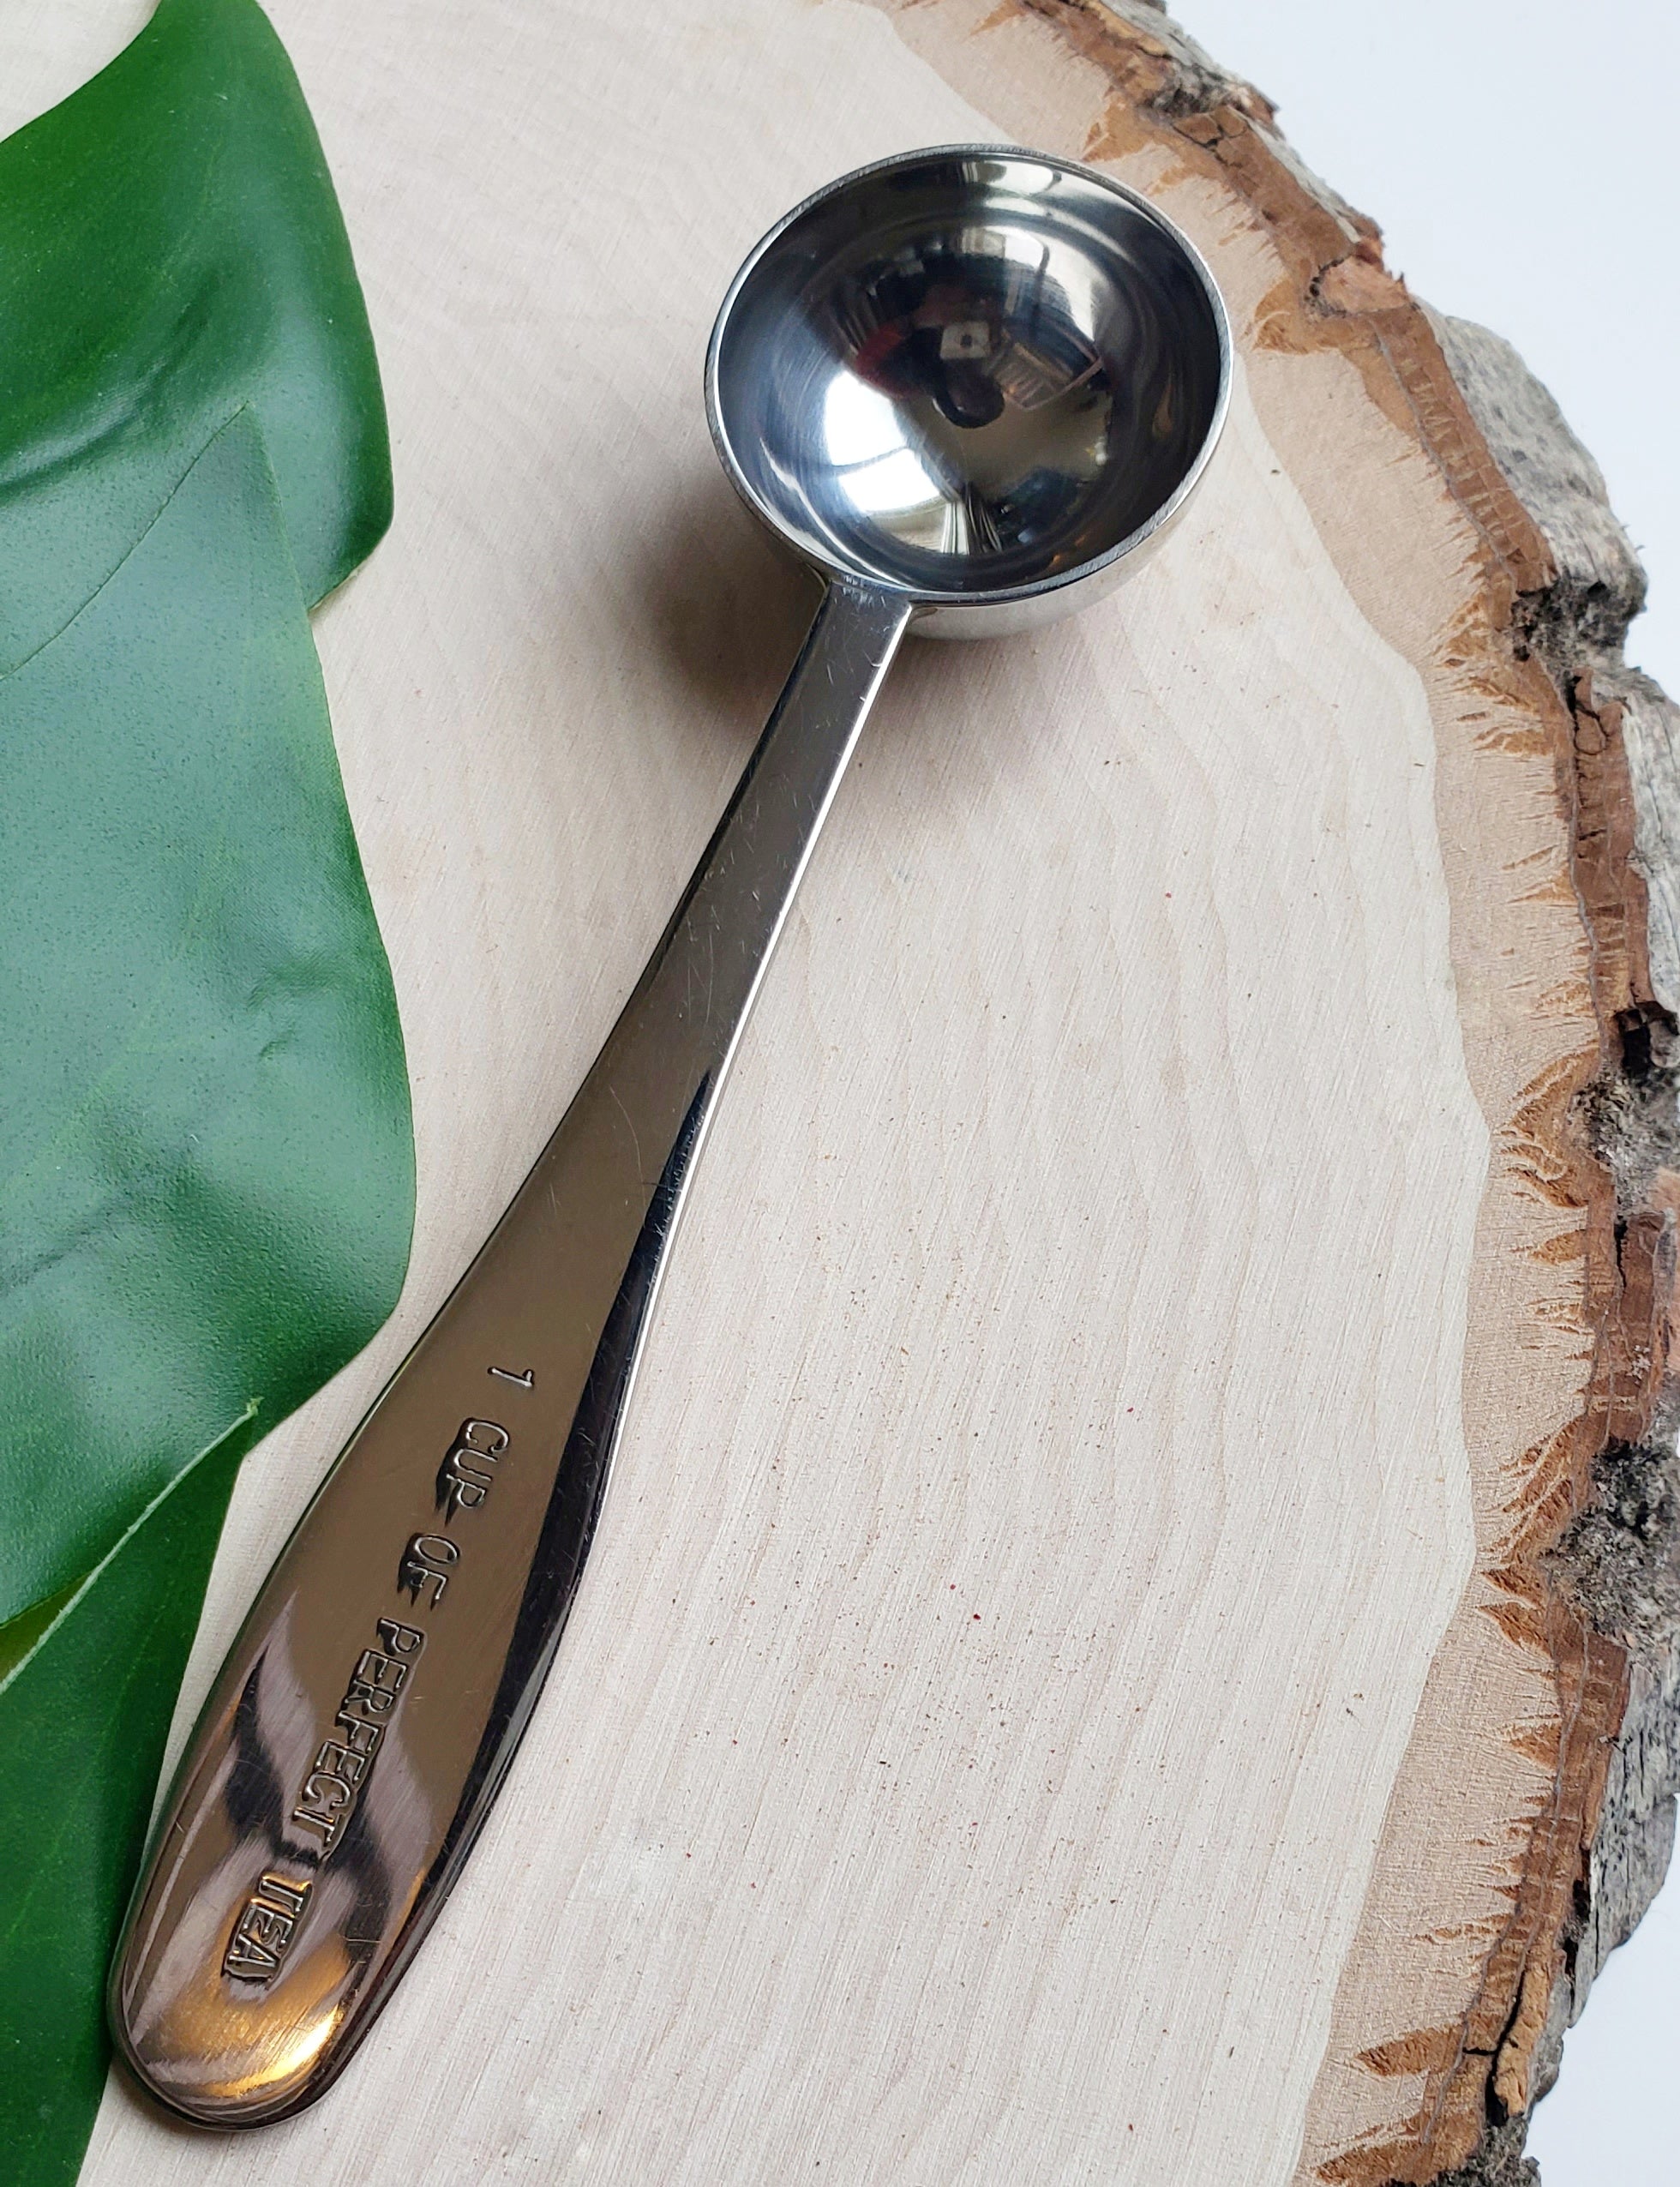 One Cup of Perfect Tea Spoon